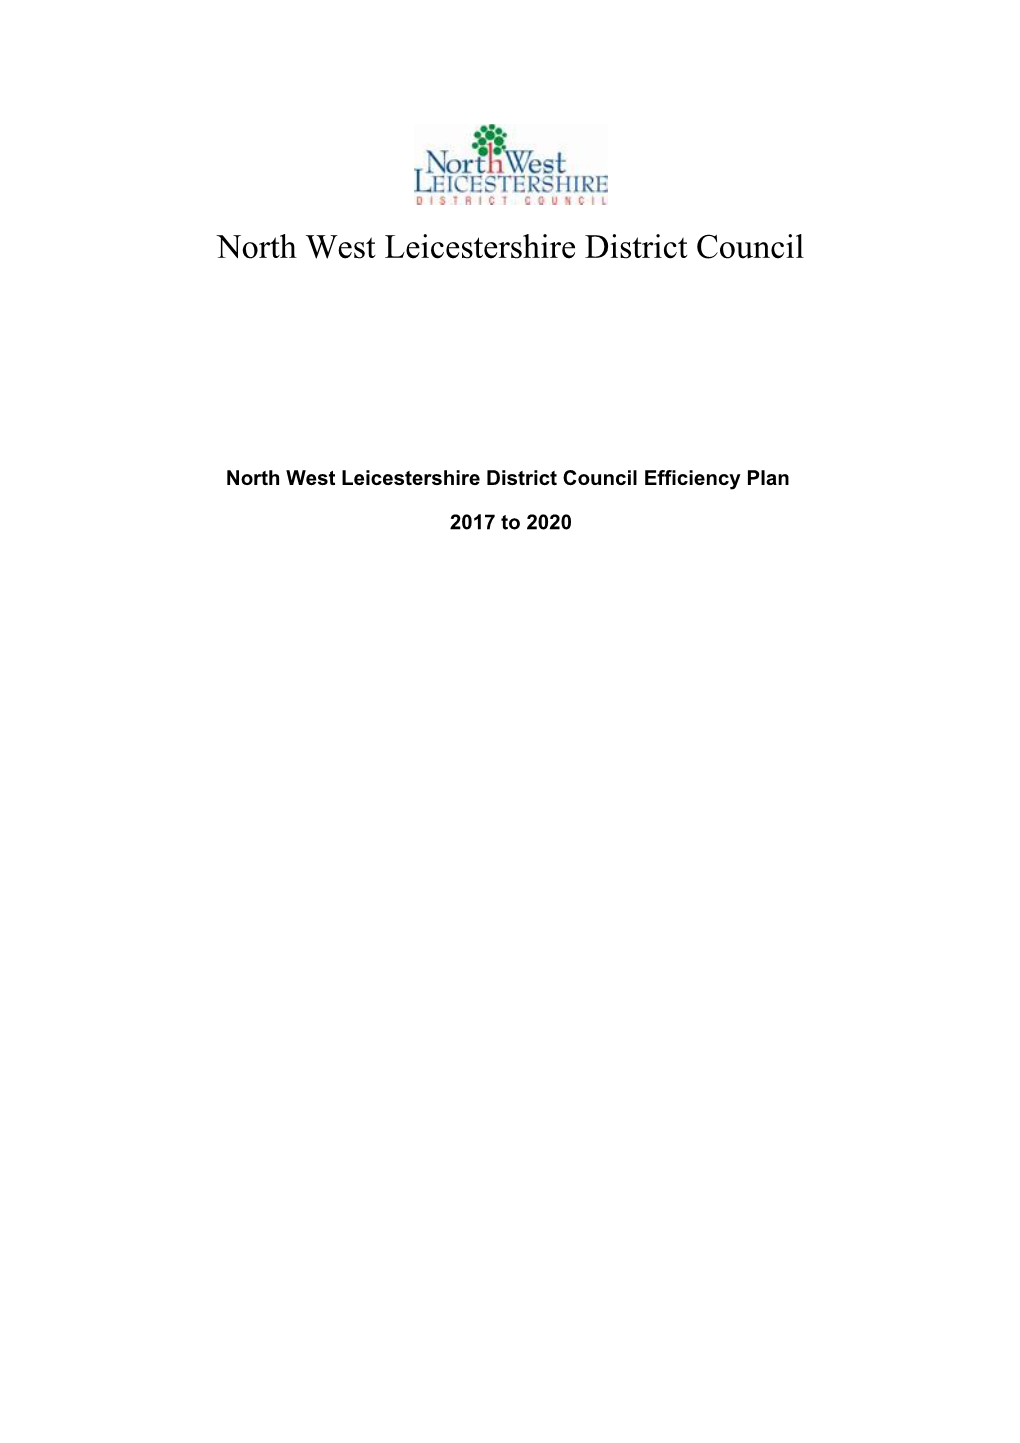 North West Leicestershire District Council Efficiency Plan